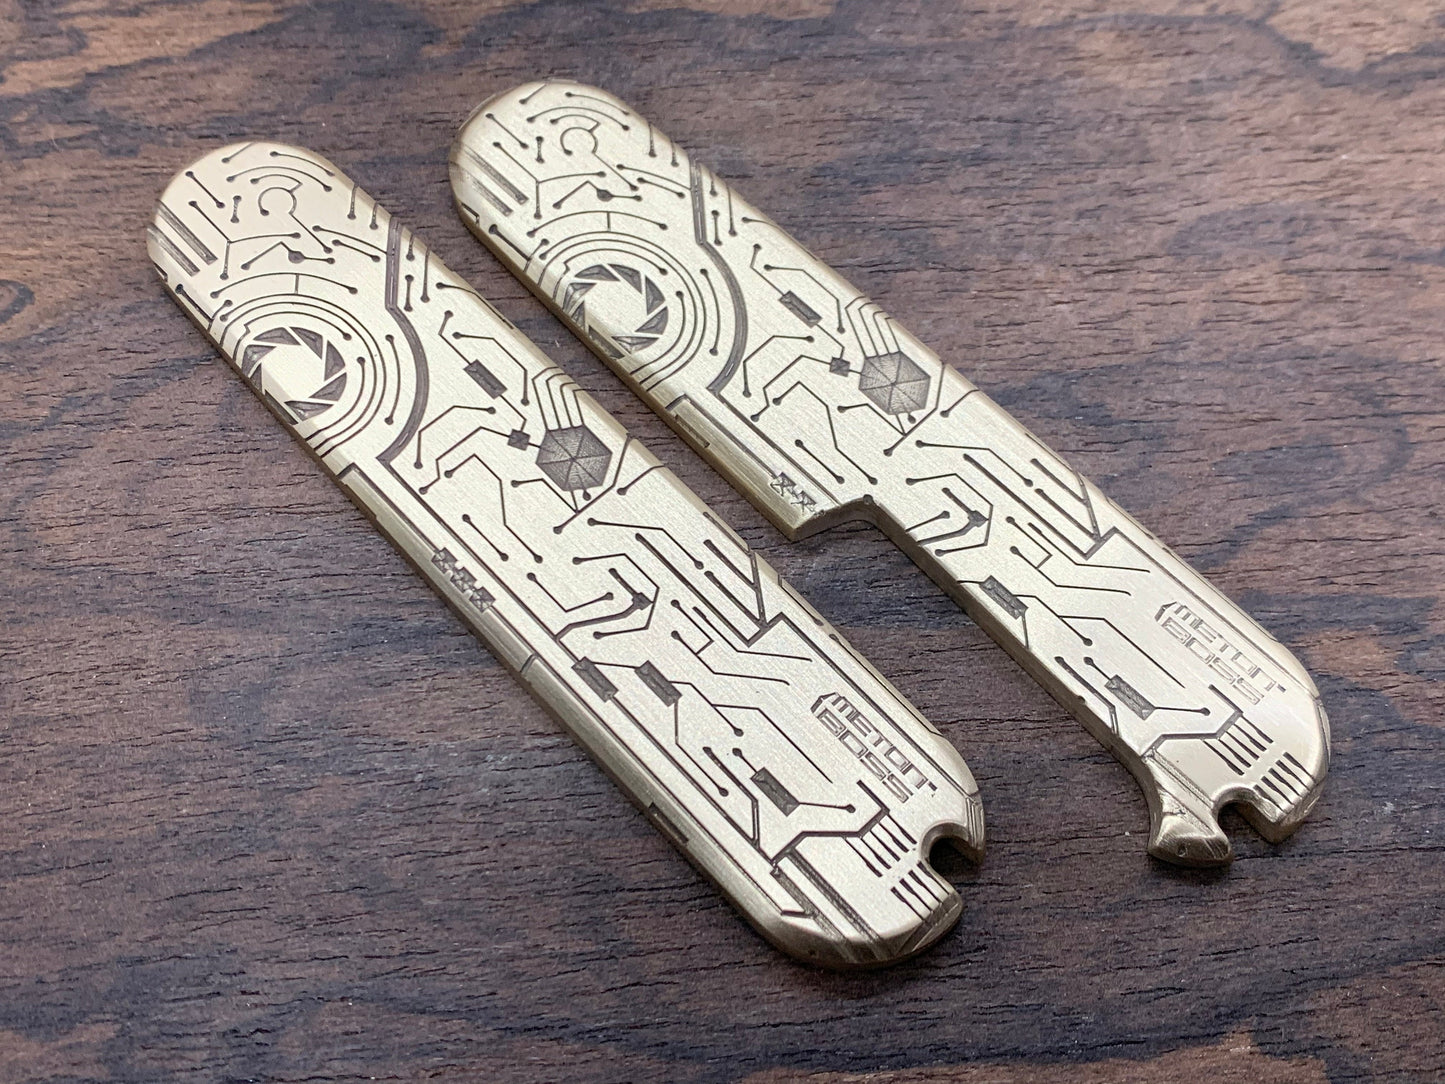 CIRCUIT BOARD engraved 91mm Scales for Swiss Army SAK Brass 91mm